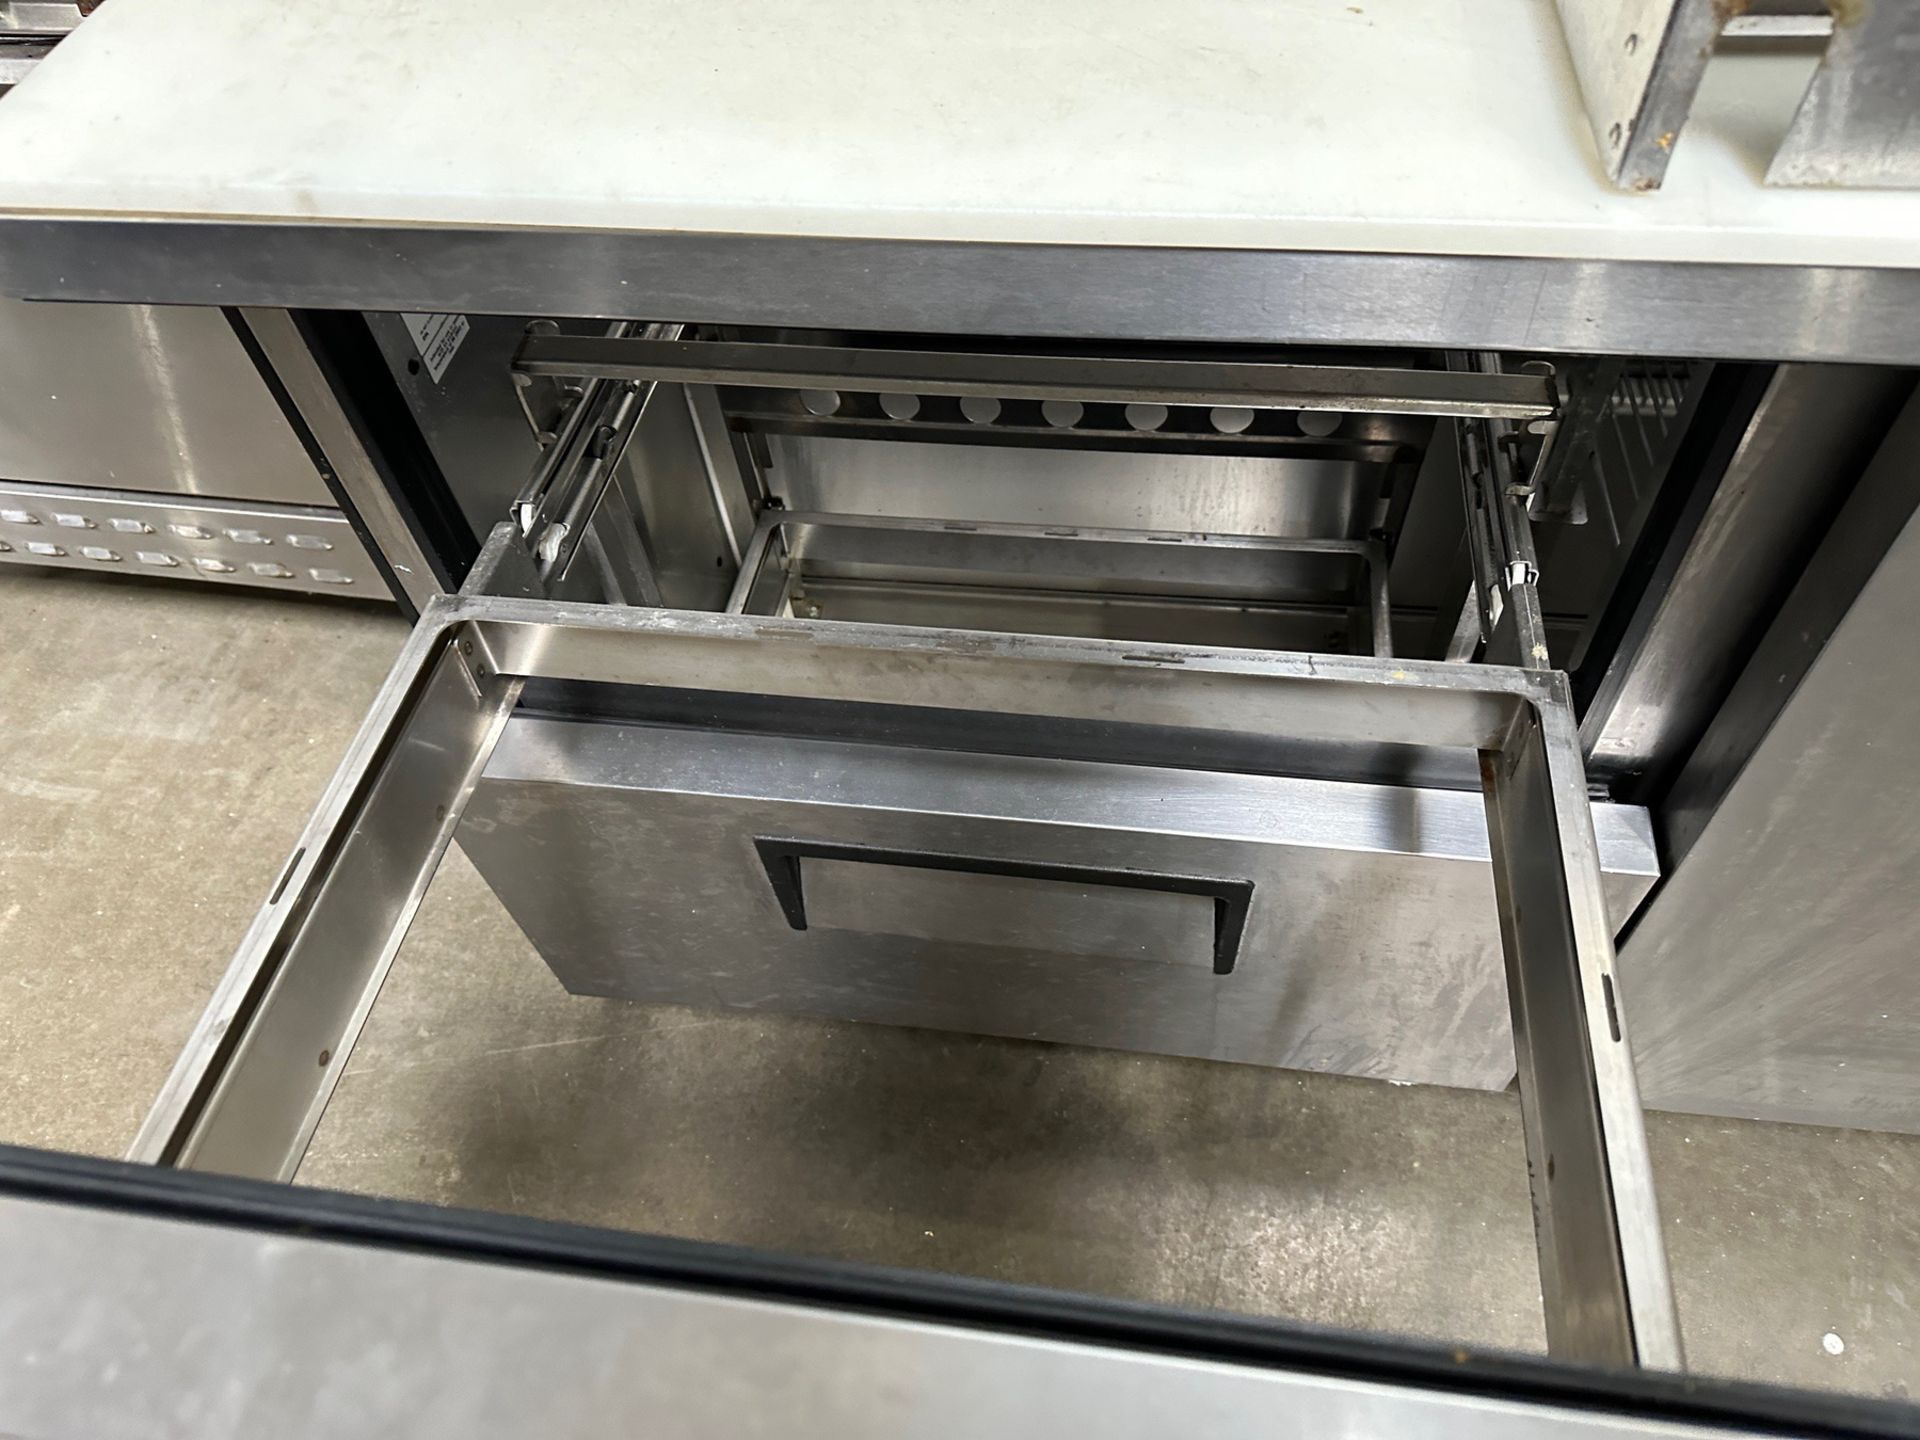 True Refrigeration Stainless Steel Refrigerated Prep Station | Rig Fee $100 - Image 3 of 6